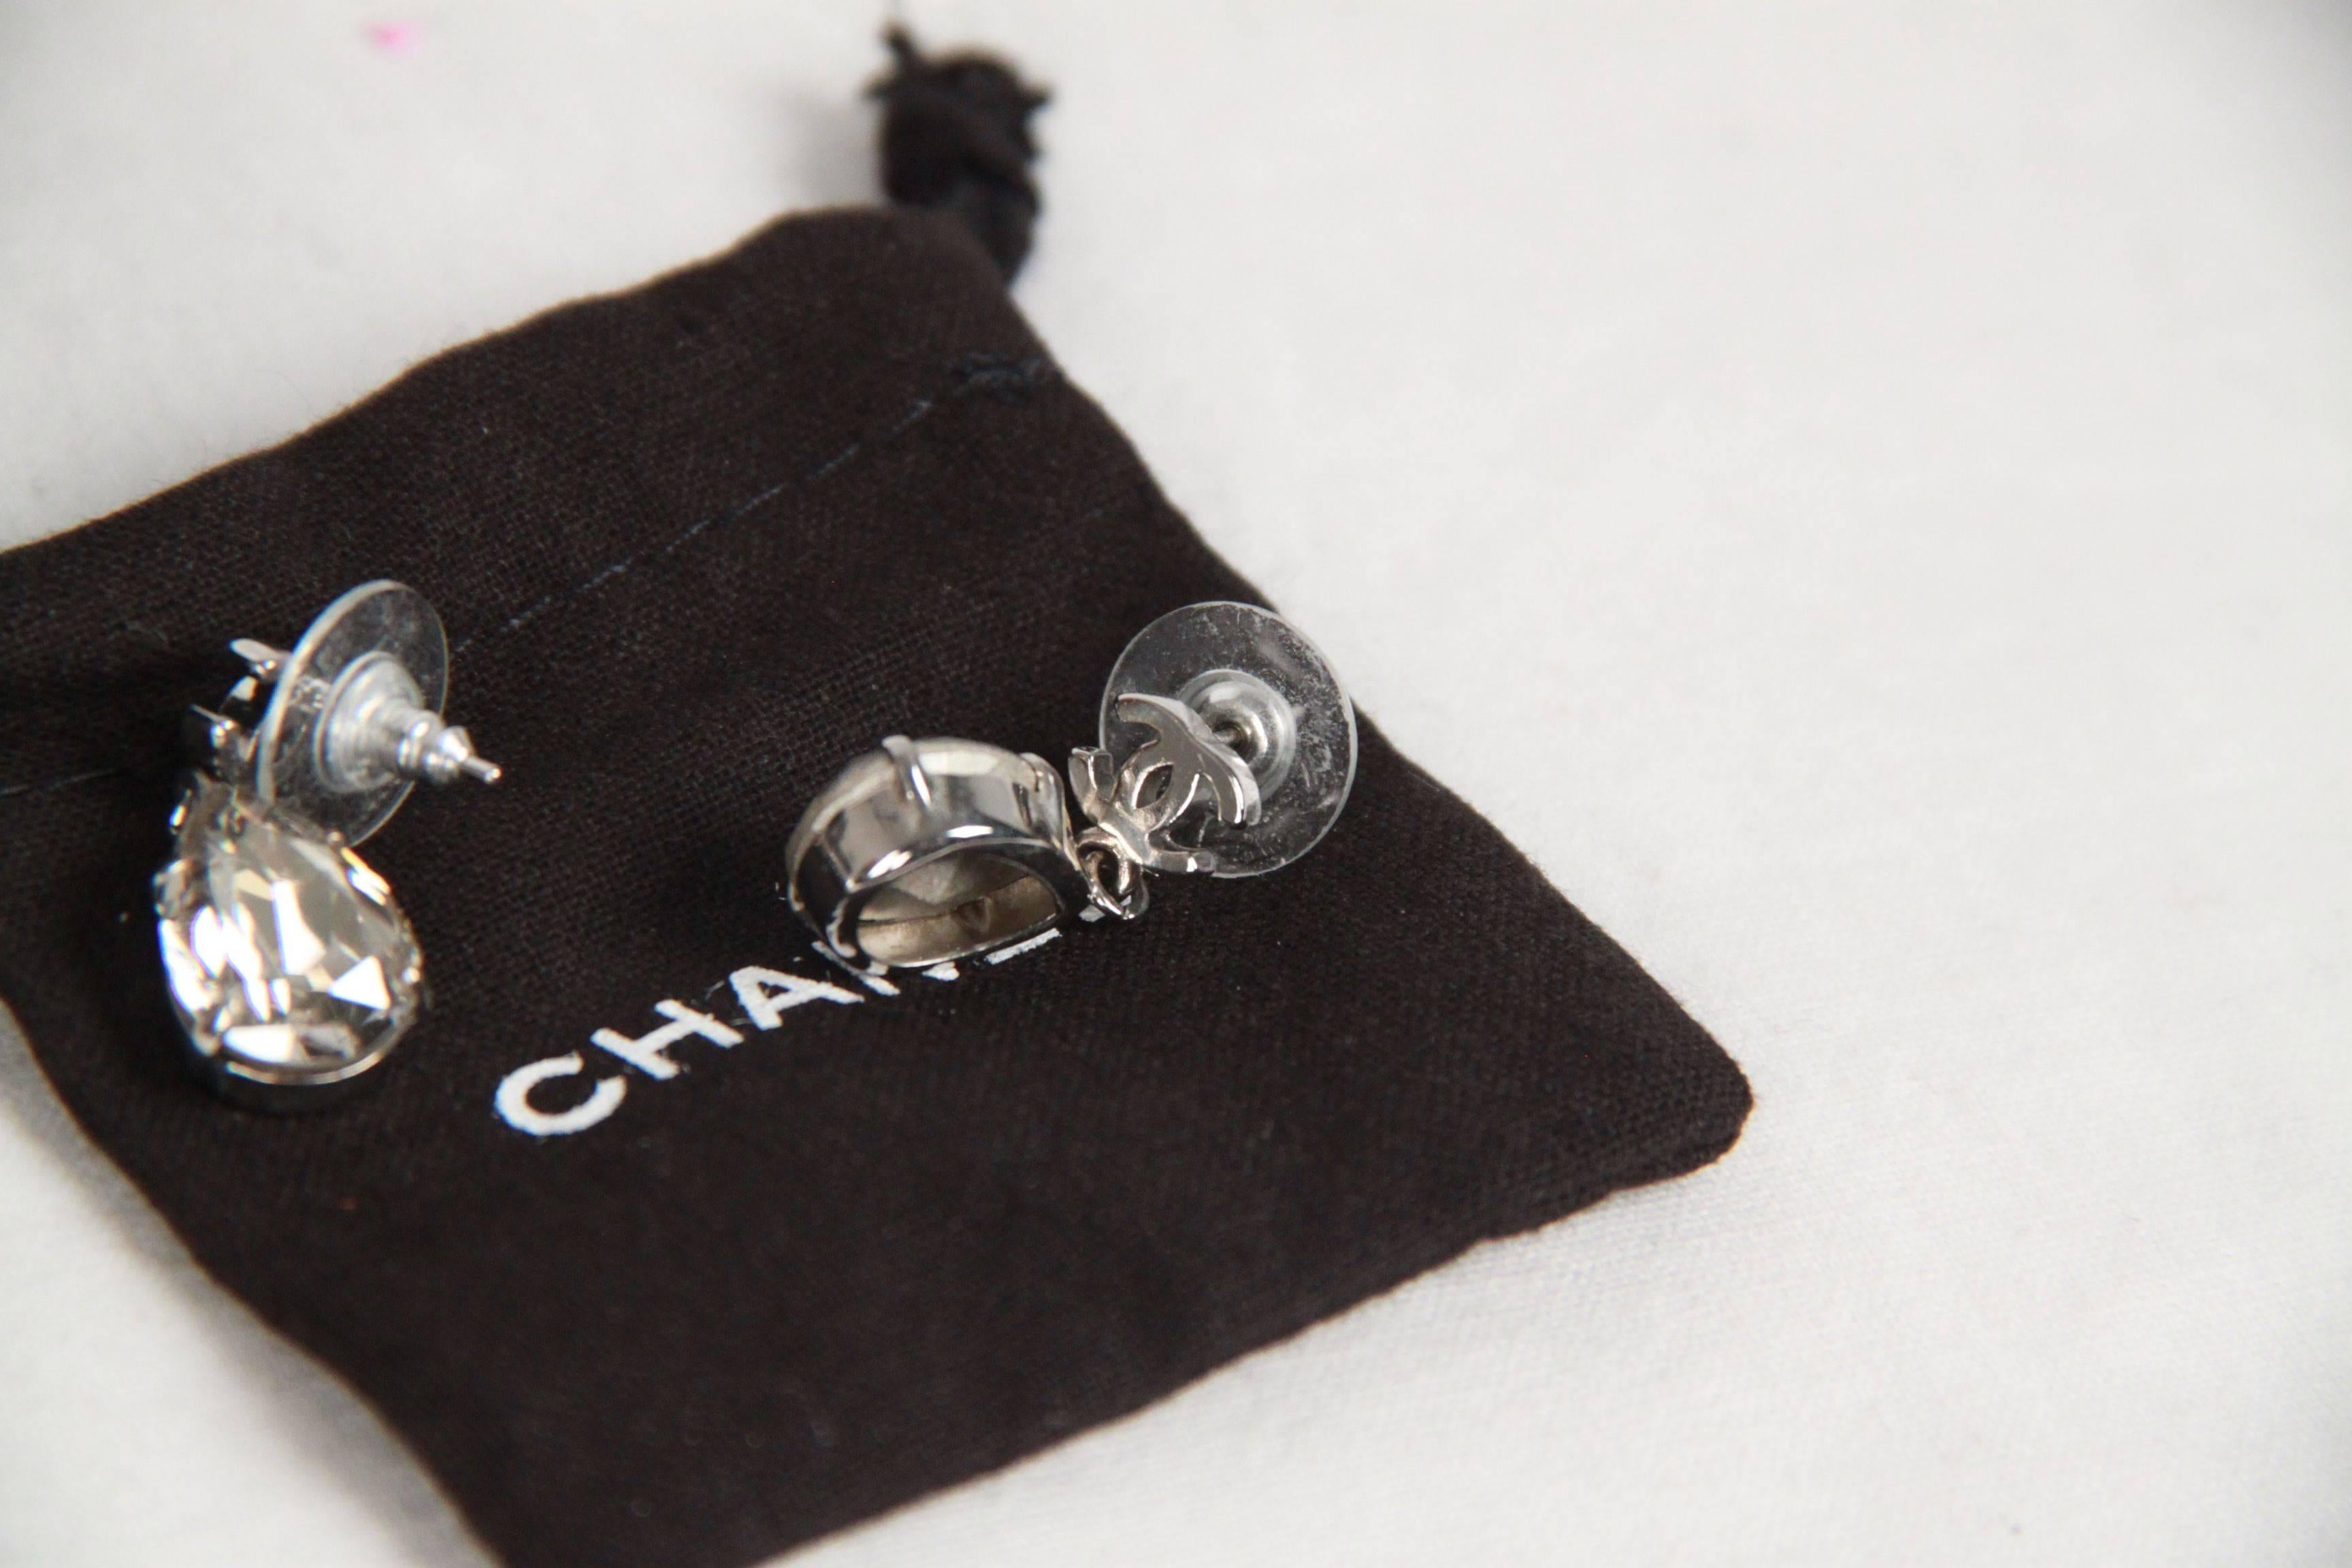 - Chanel Crystal & Silver CC Tear Drop Earrings
- Silver metal CC logos
- Teardrop-cut crystals
- For pierced ears
- Made in: Not given
- Stamp: Missing date stamp
- Total lenght: 0.75 inches - 2 cm
- Come with their original CHANEL box and pouch